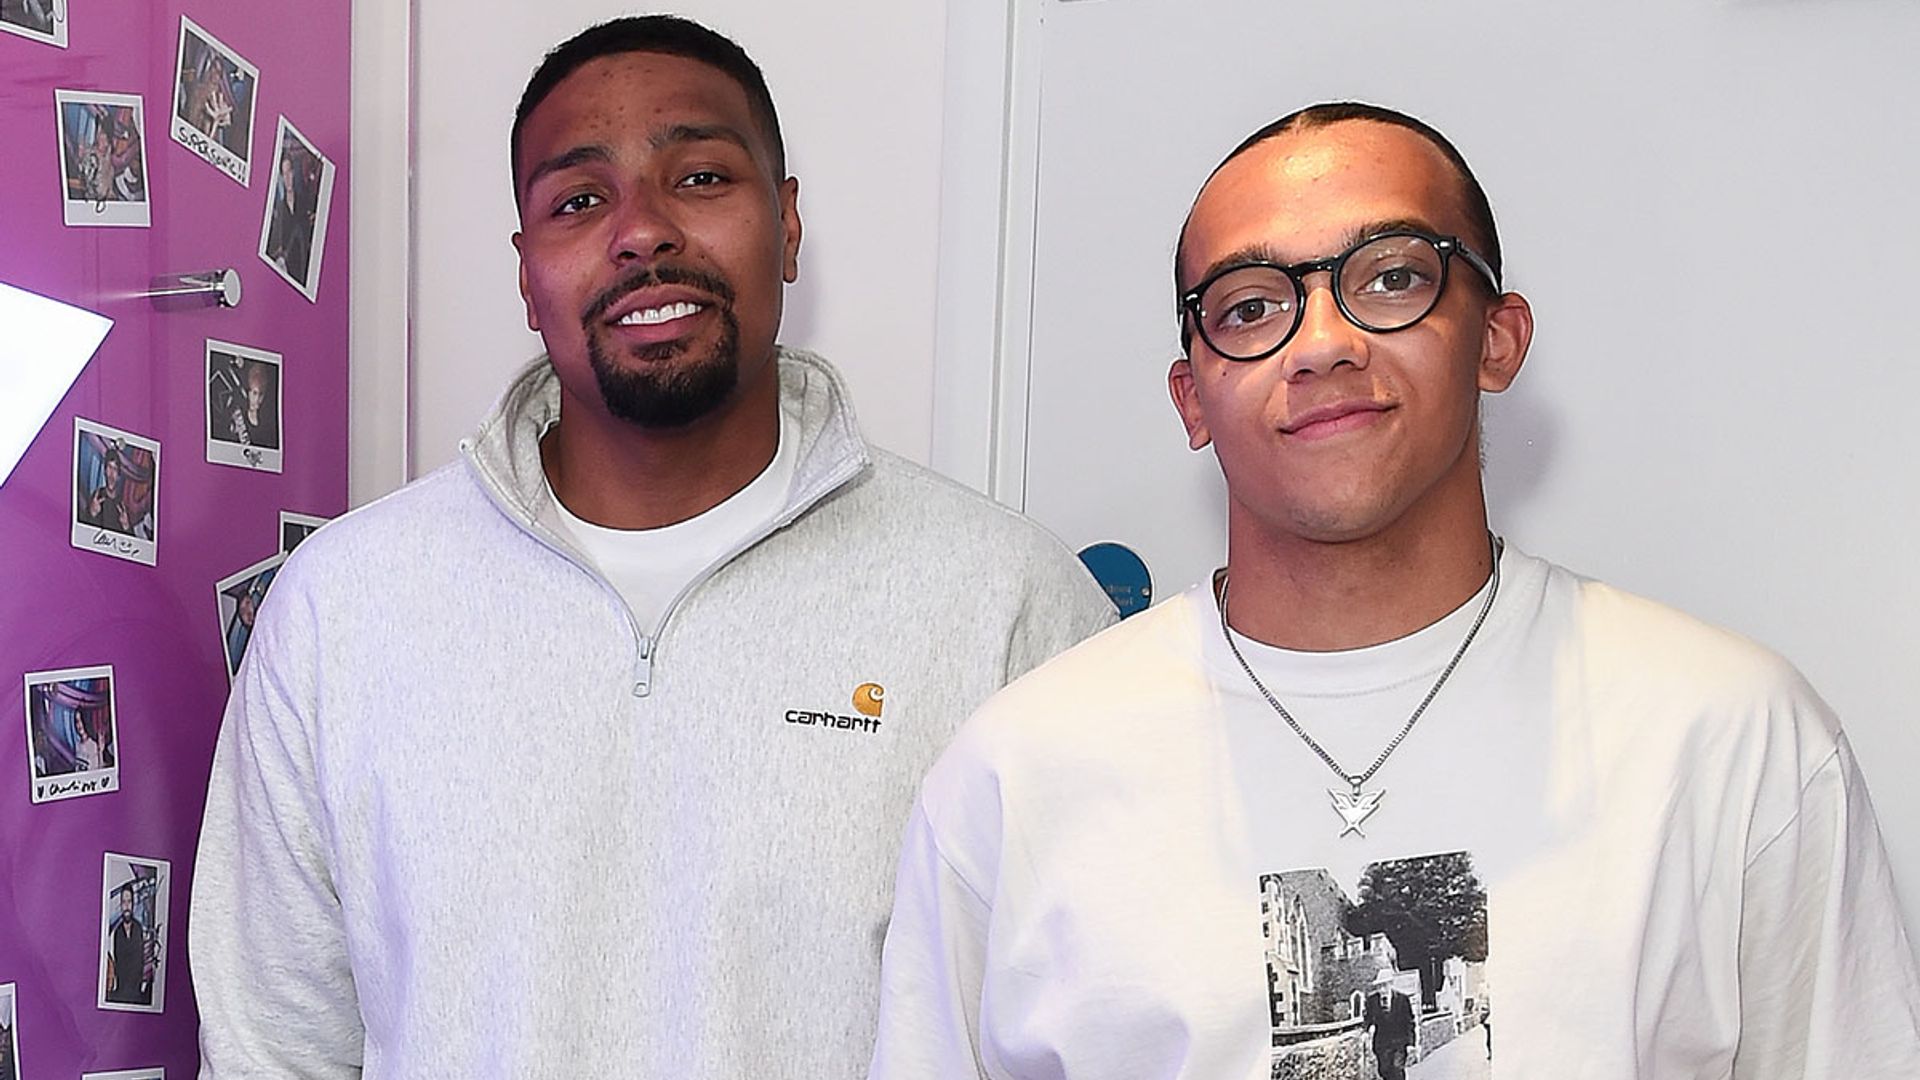 Diversity's Jordan Banjo and Perri Kiely reveal how they've coped with controversy over BLM routine on BGT